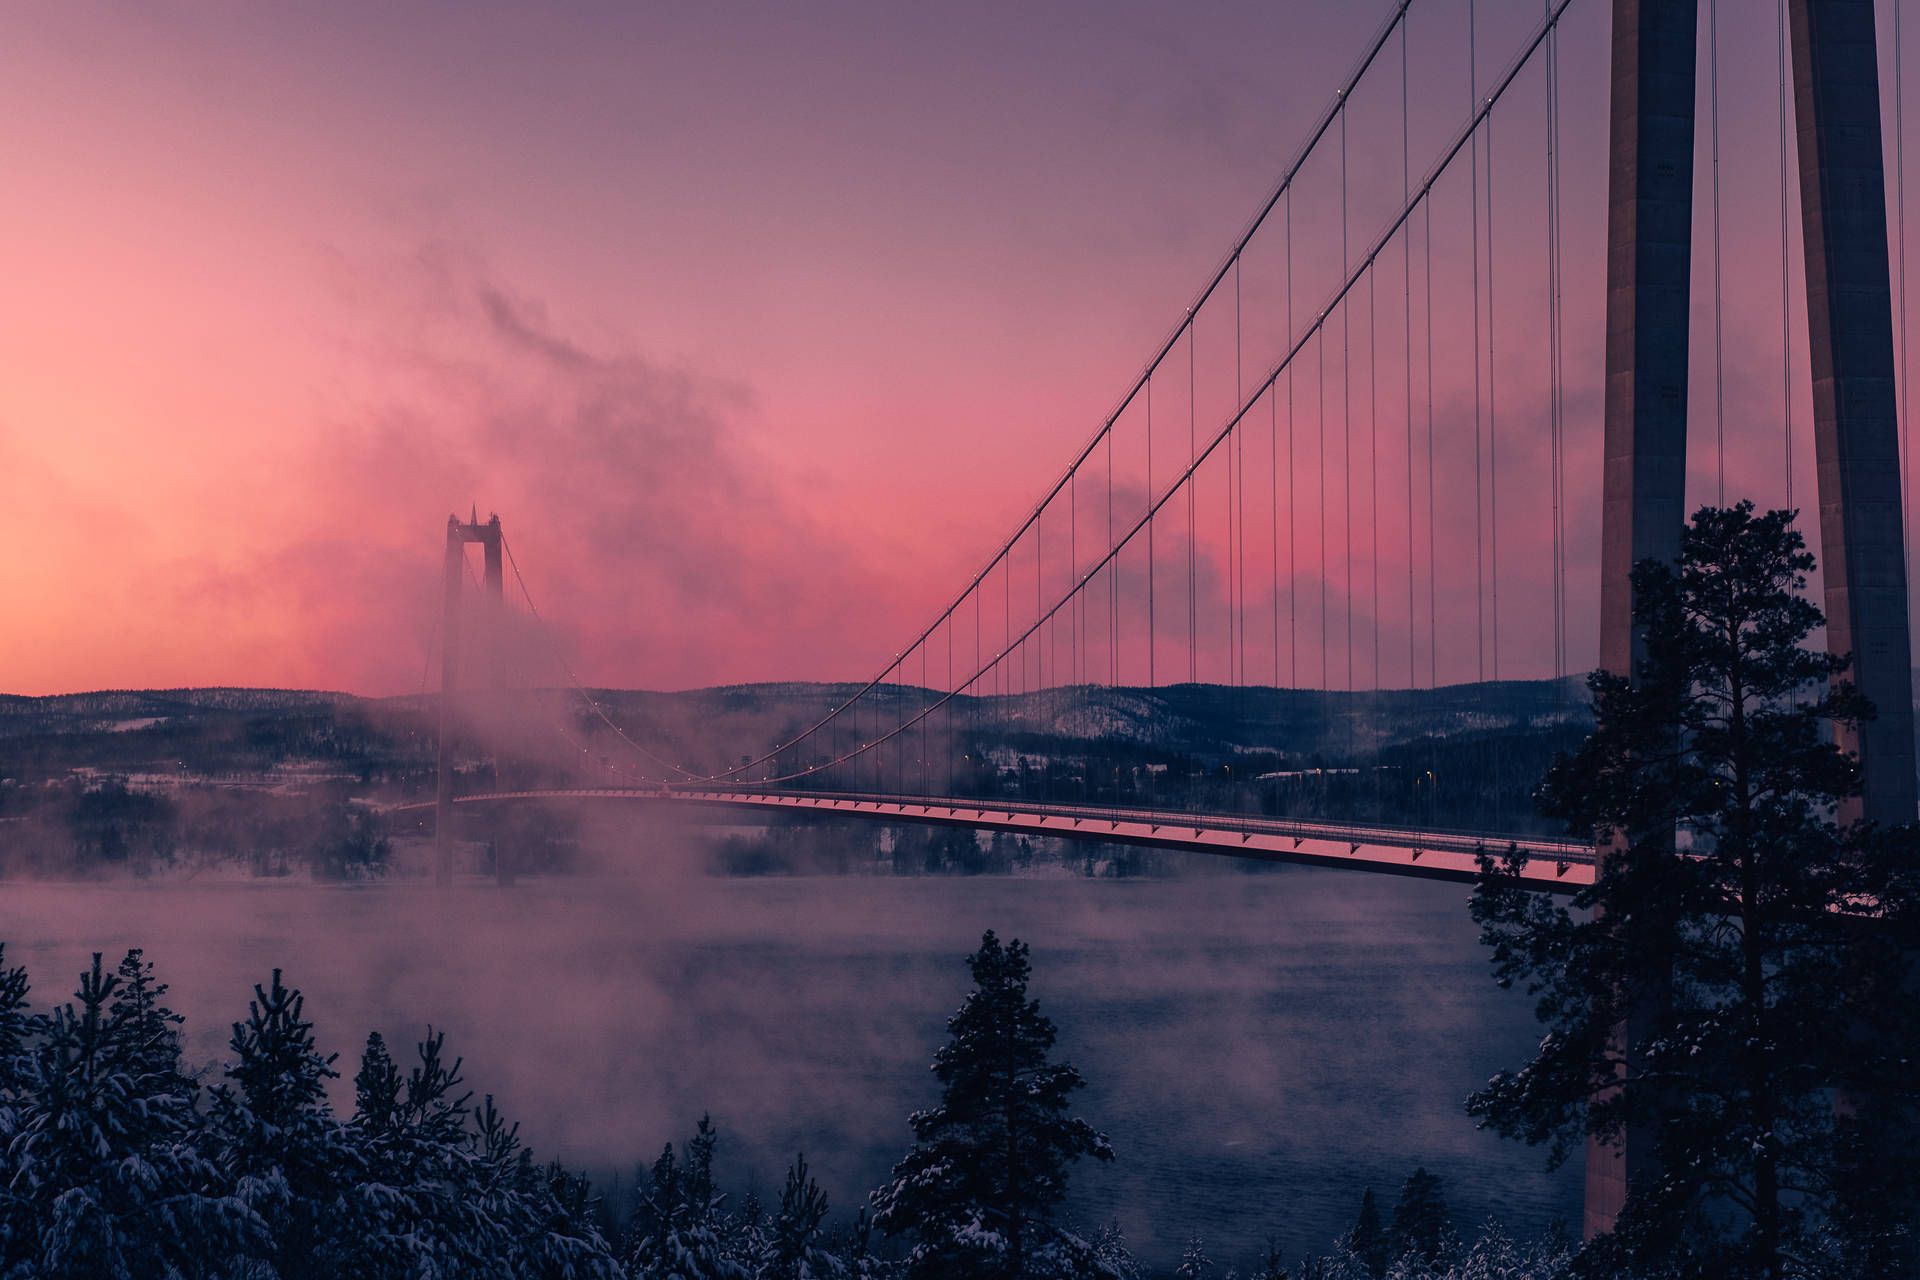 A suspension bridge with fog and a pink sky - Fog